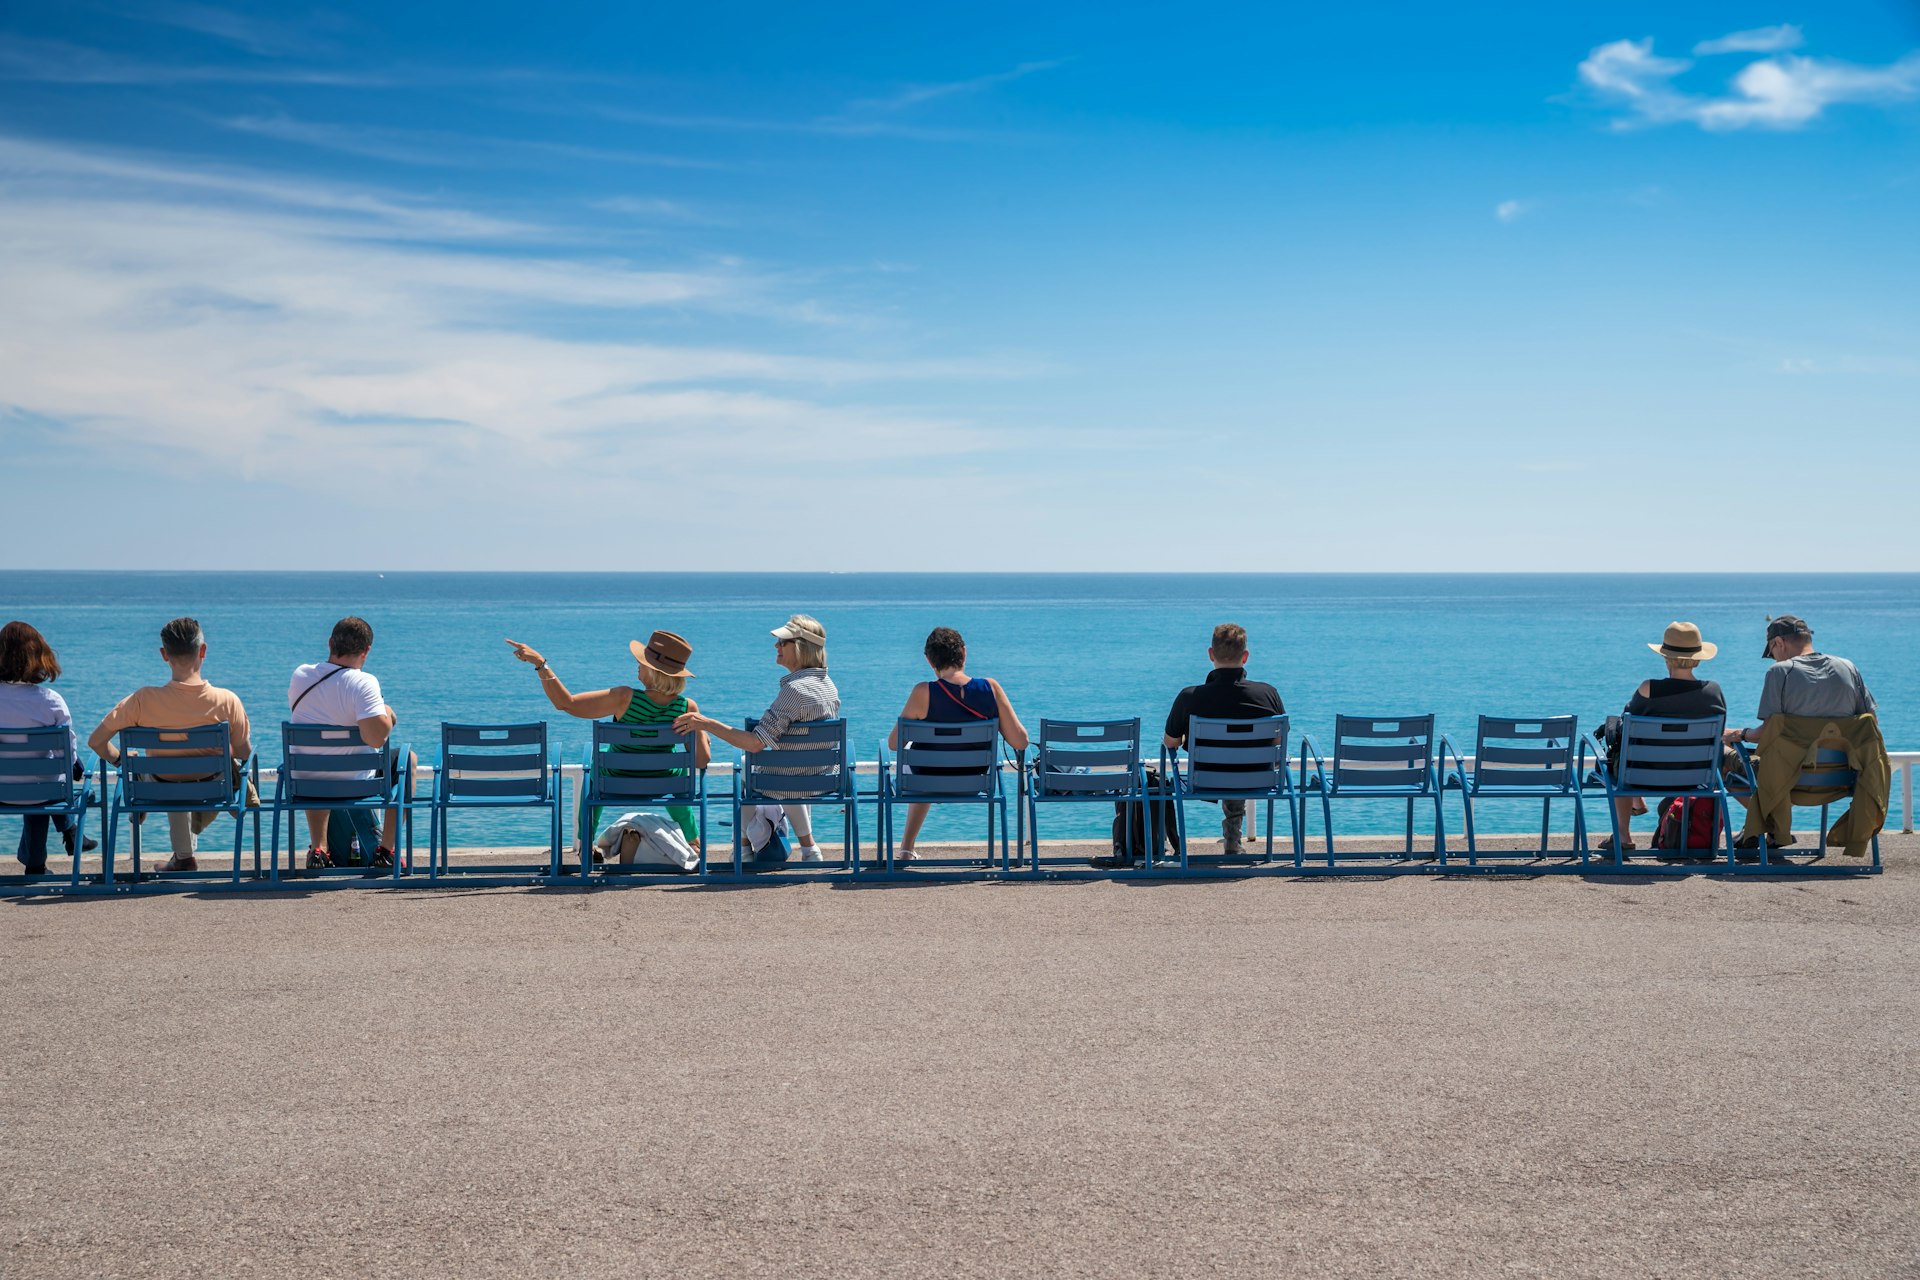 People sit on chairs along the waterfront in Nice, Côte d’Azur, France